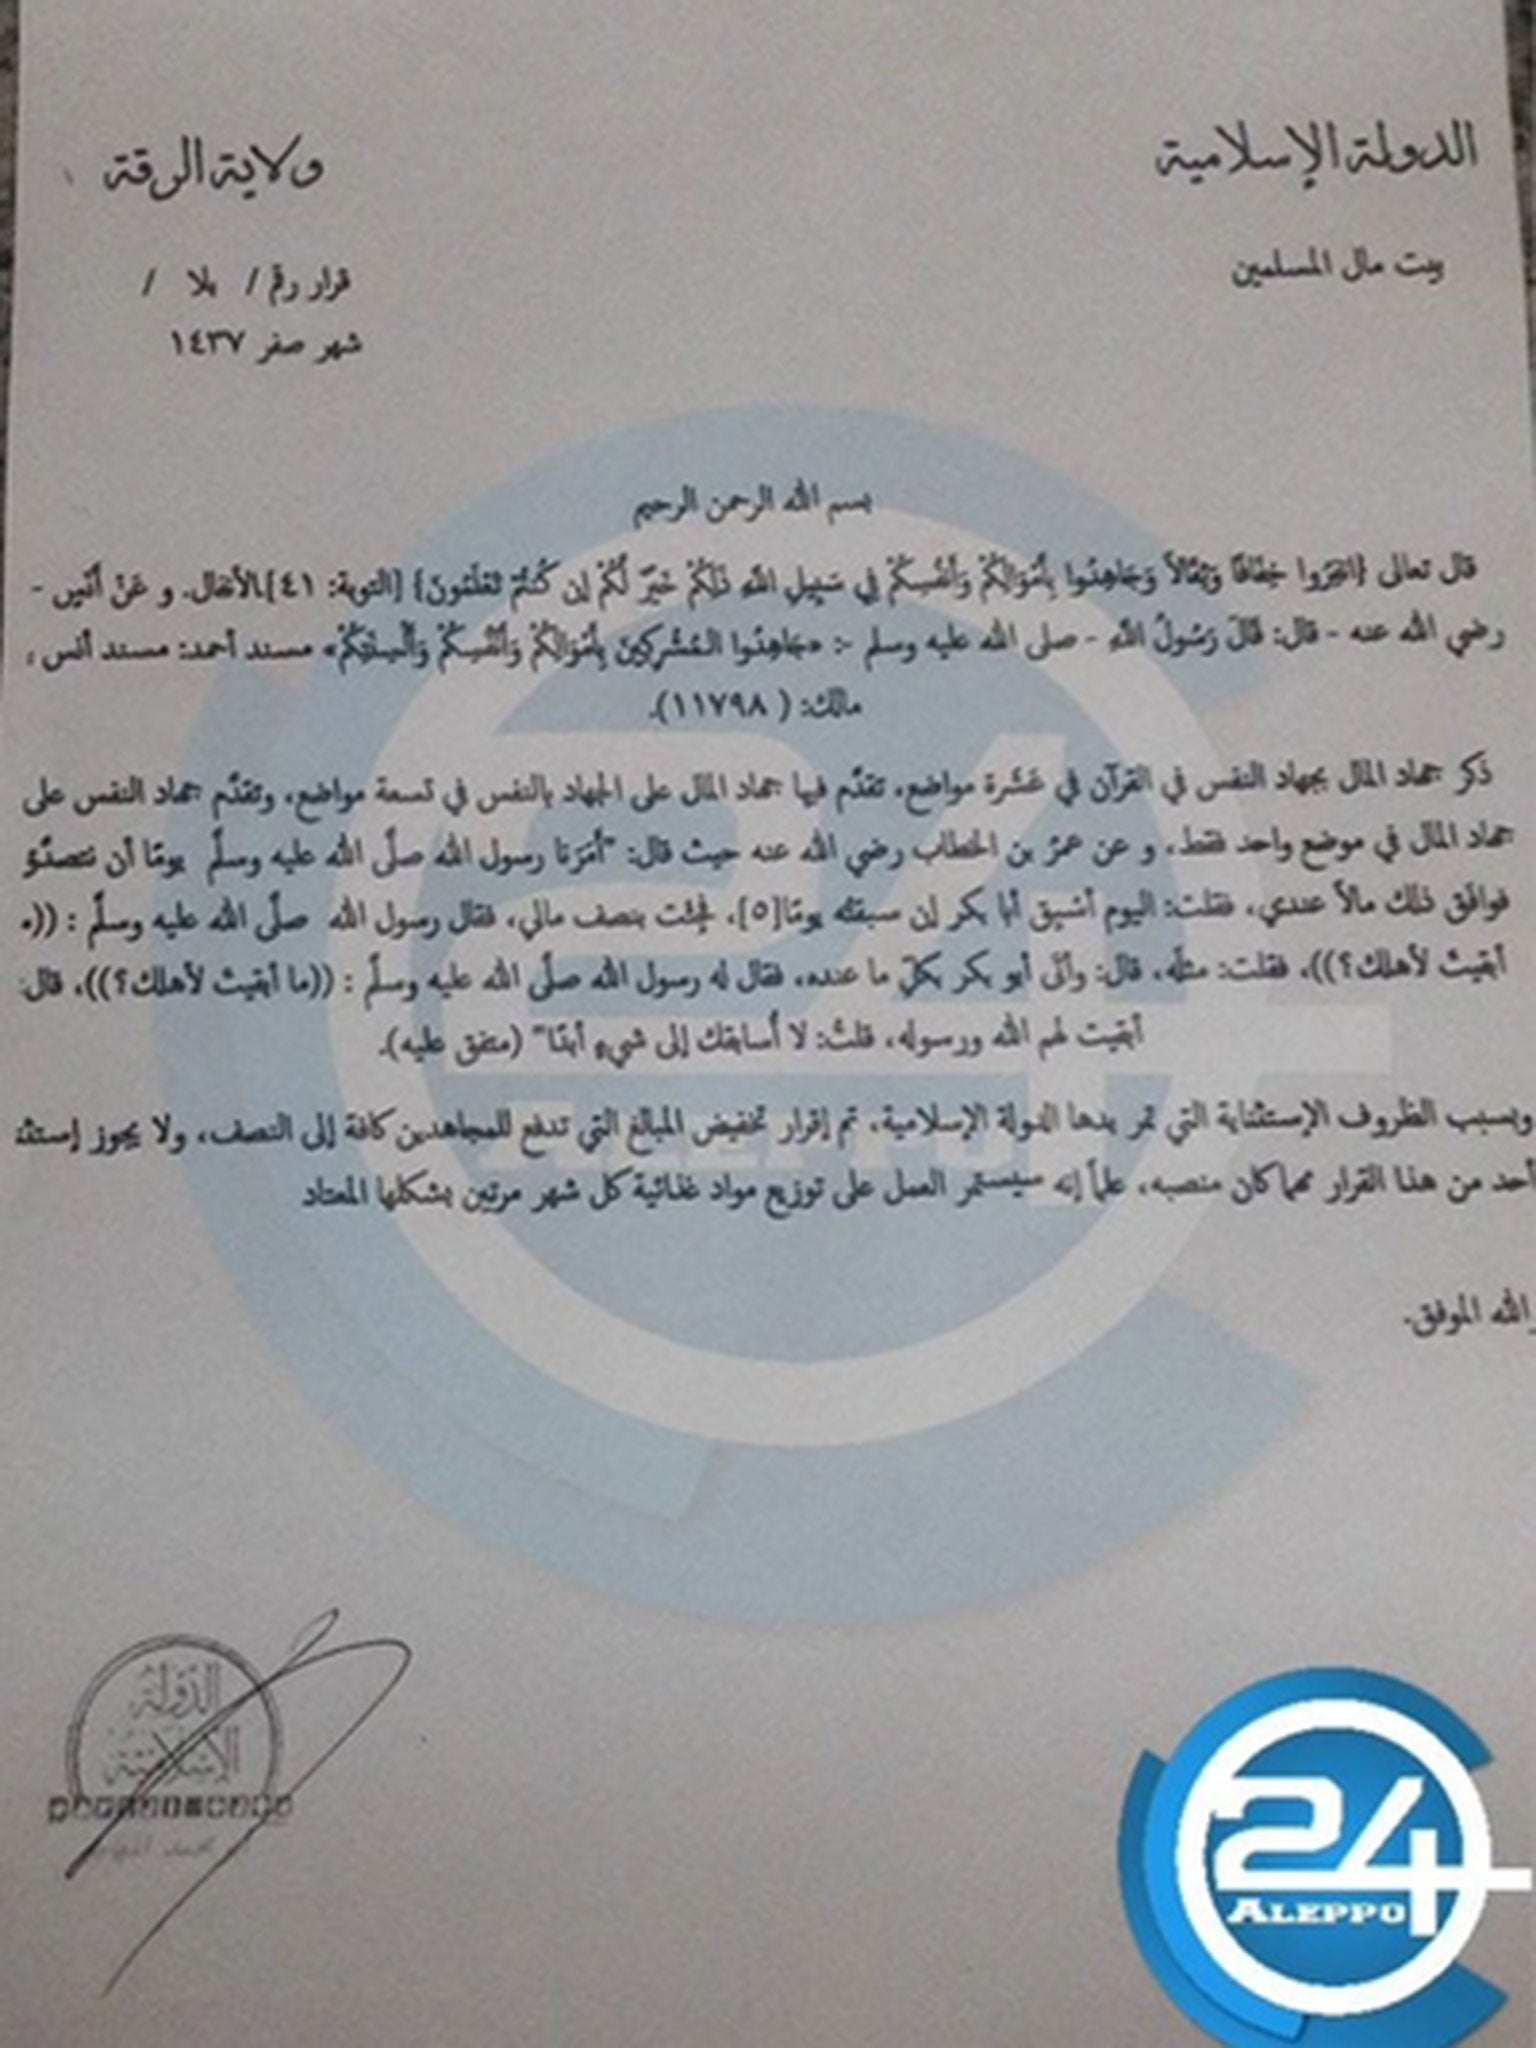 A document appeared to show fighters' salaries were being halved in Raqqa